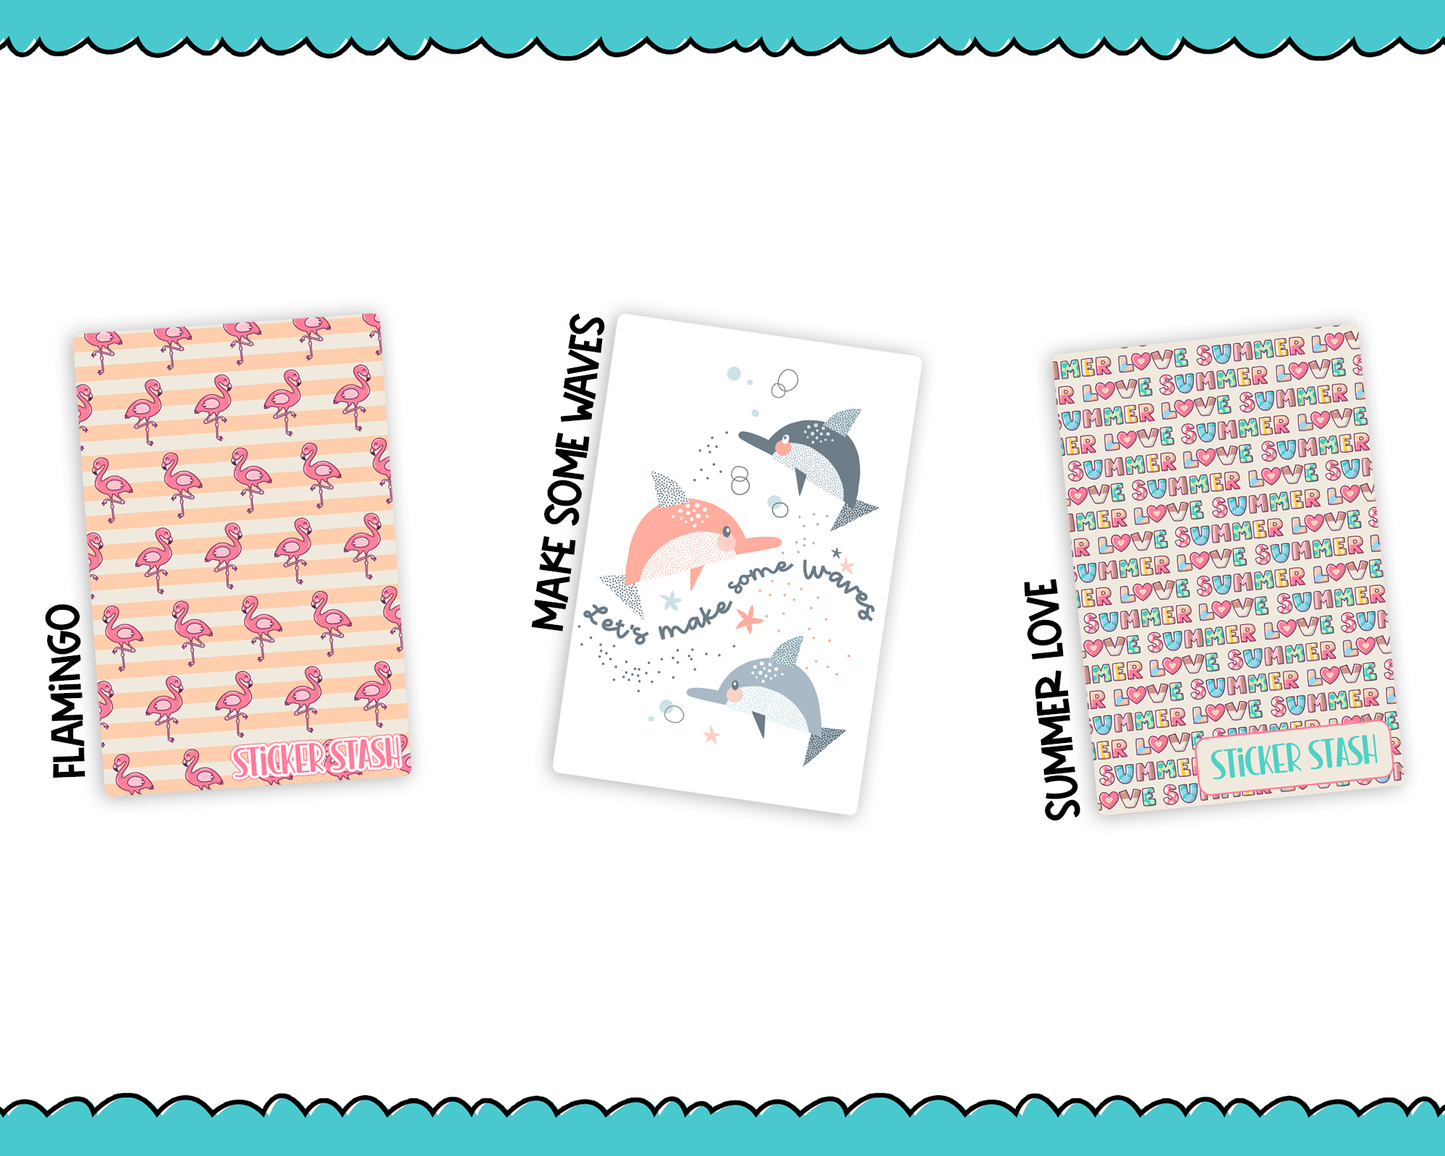 Sticker Albums - Mini Size, 4x6 Size and 5x7 Size - 60 sleeves each